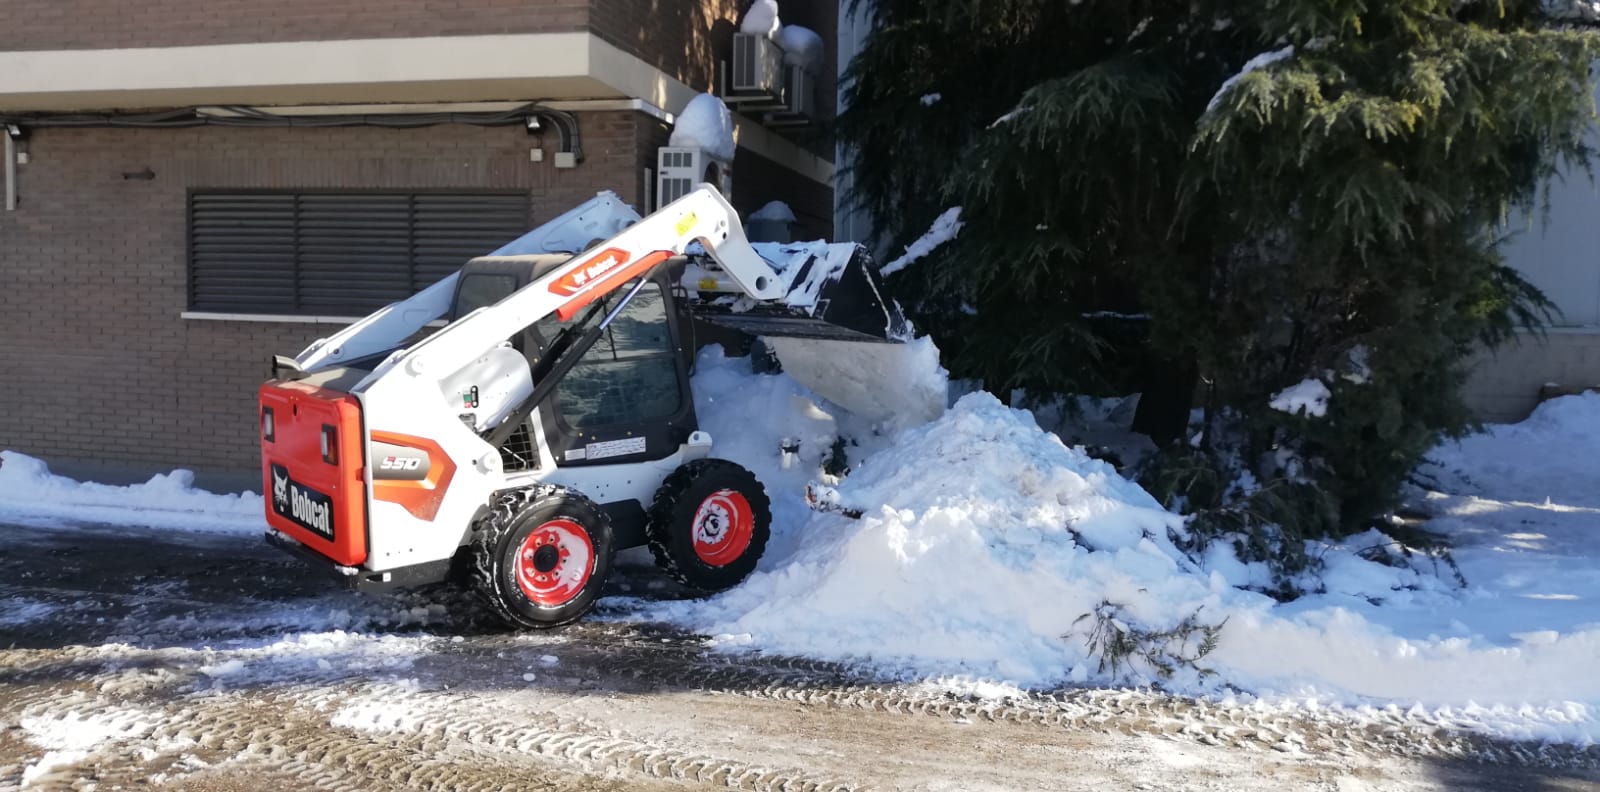 Bobcat get stuck into digging Madrid out of the snow